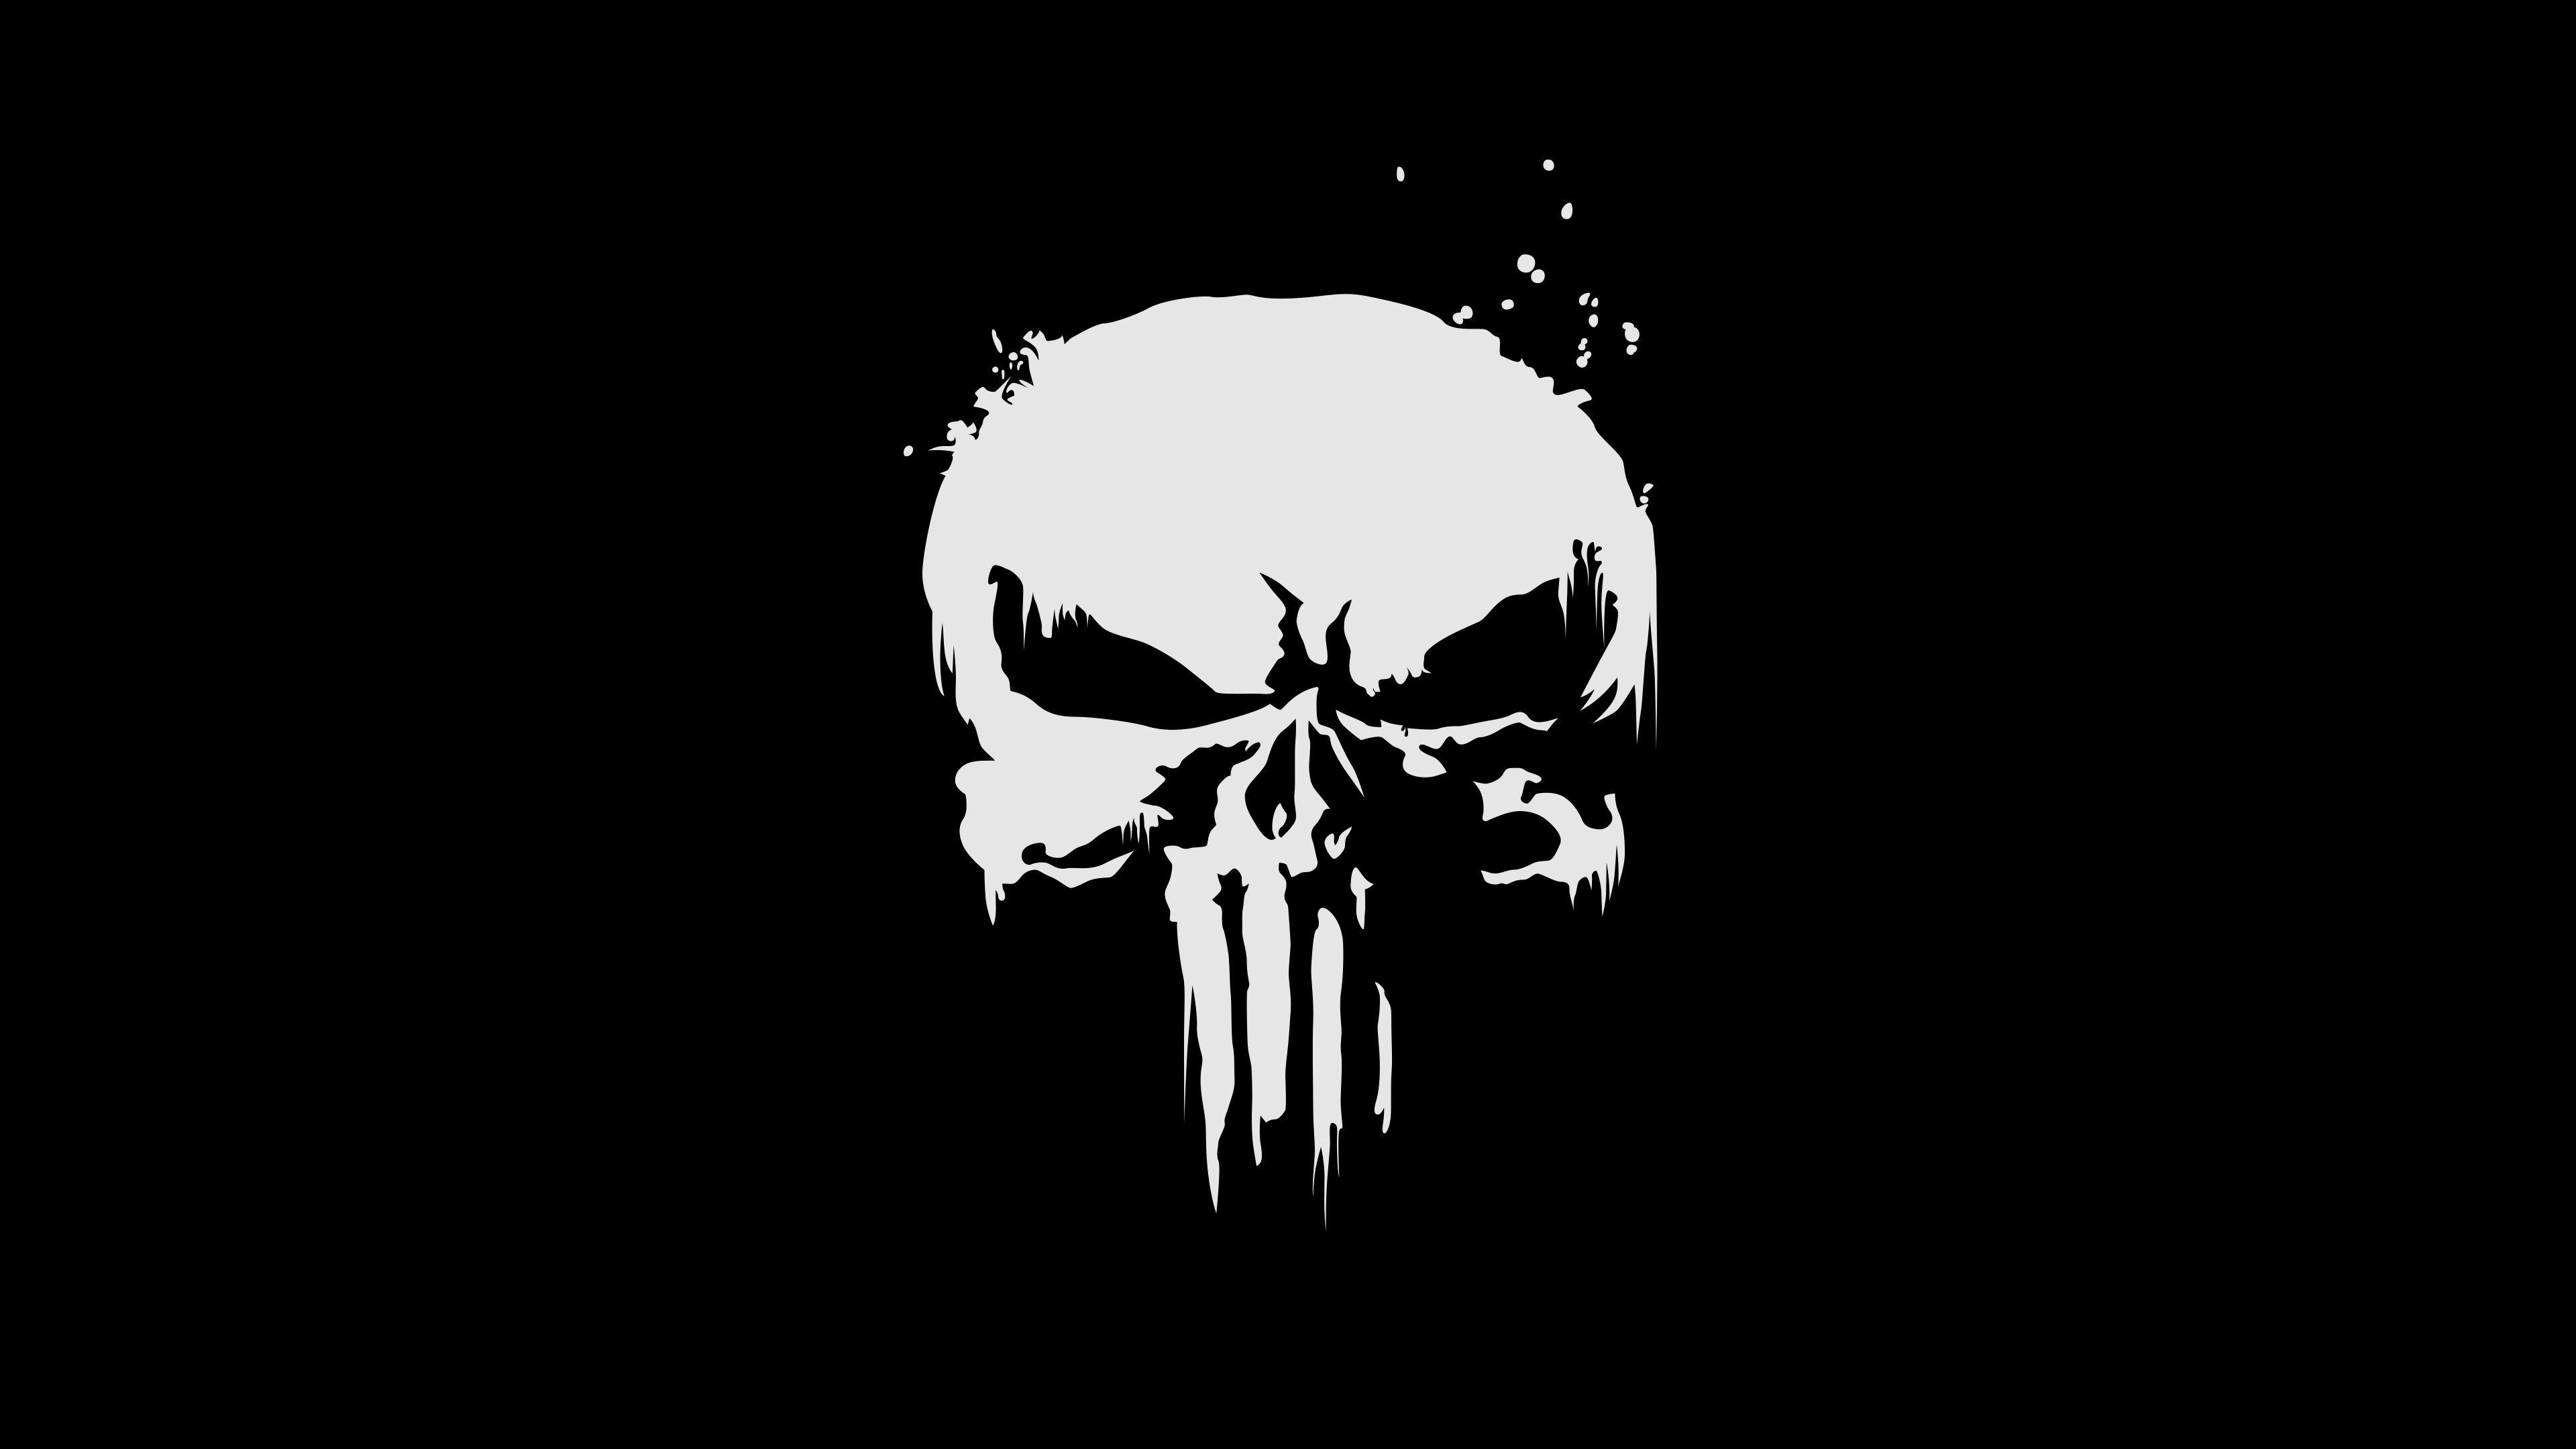 100+] Punisher Wallpapers